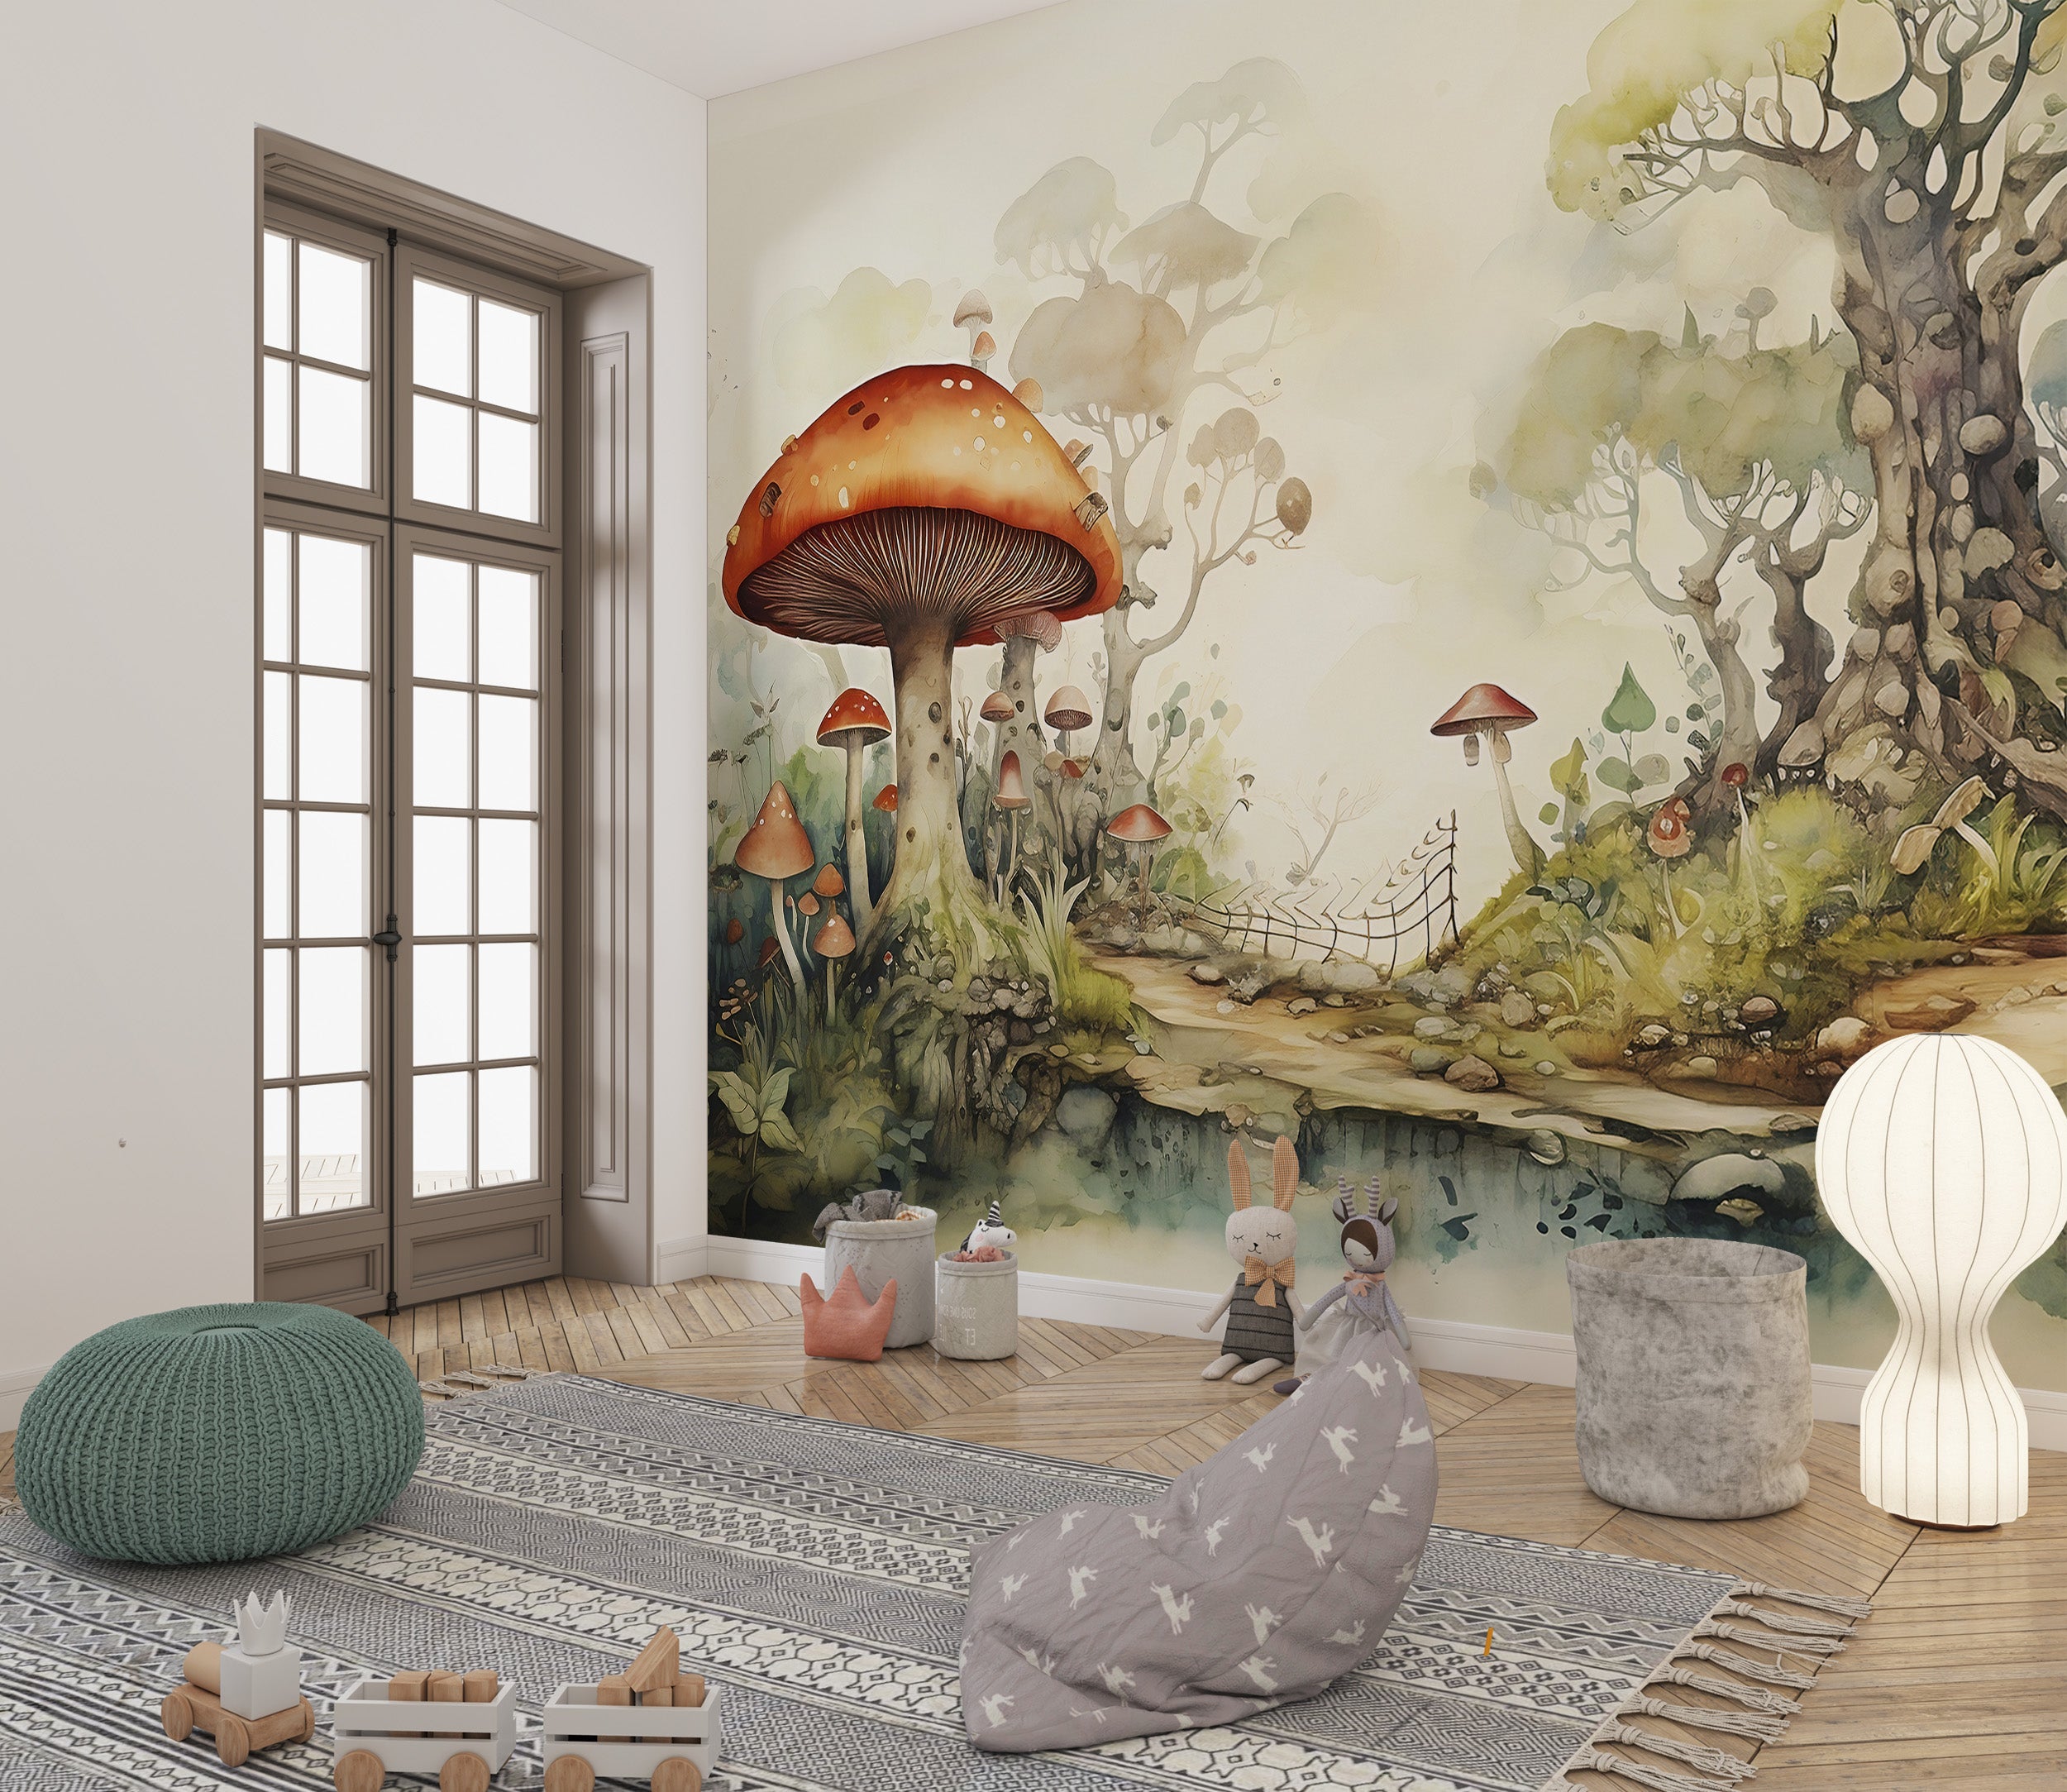 Redefine Space with Fairy Tale-Inspired Decor